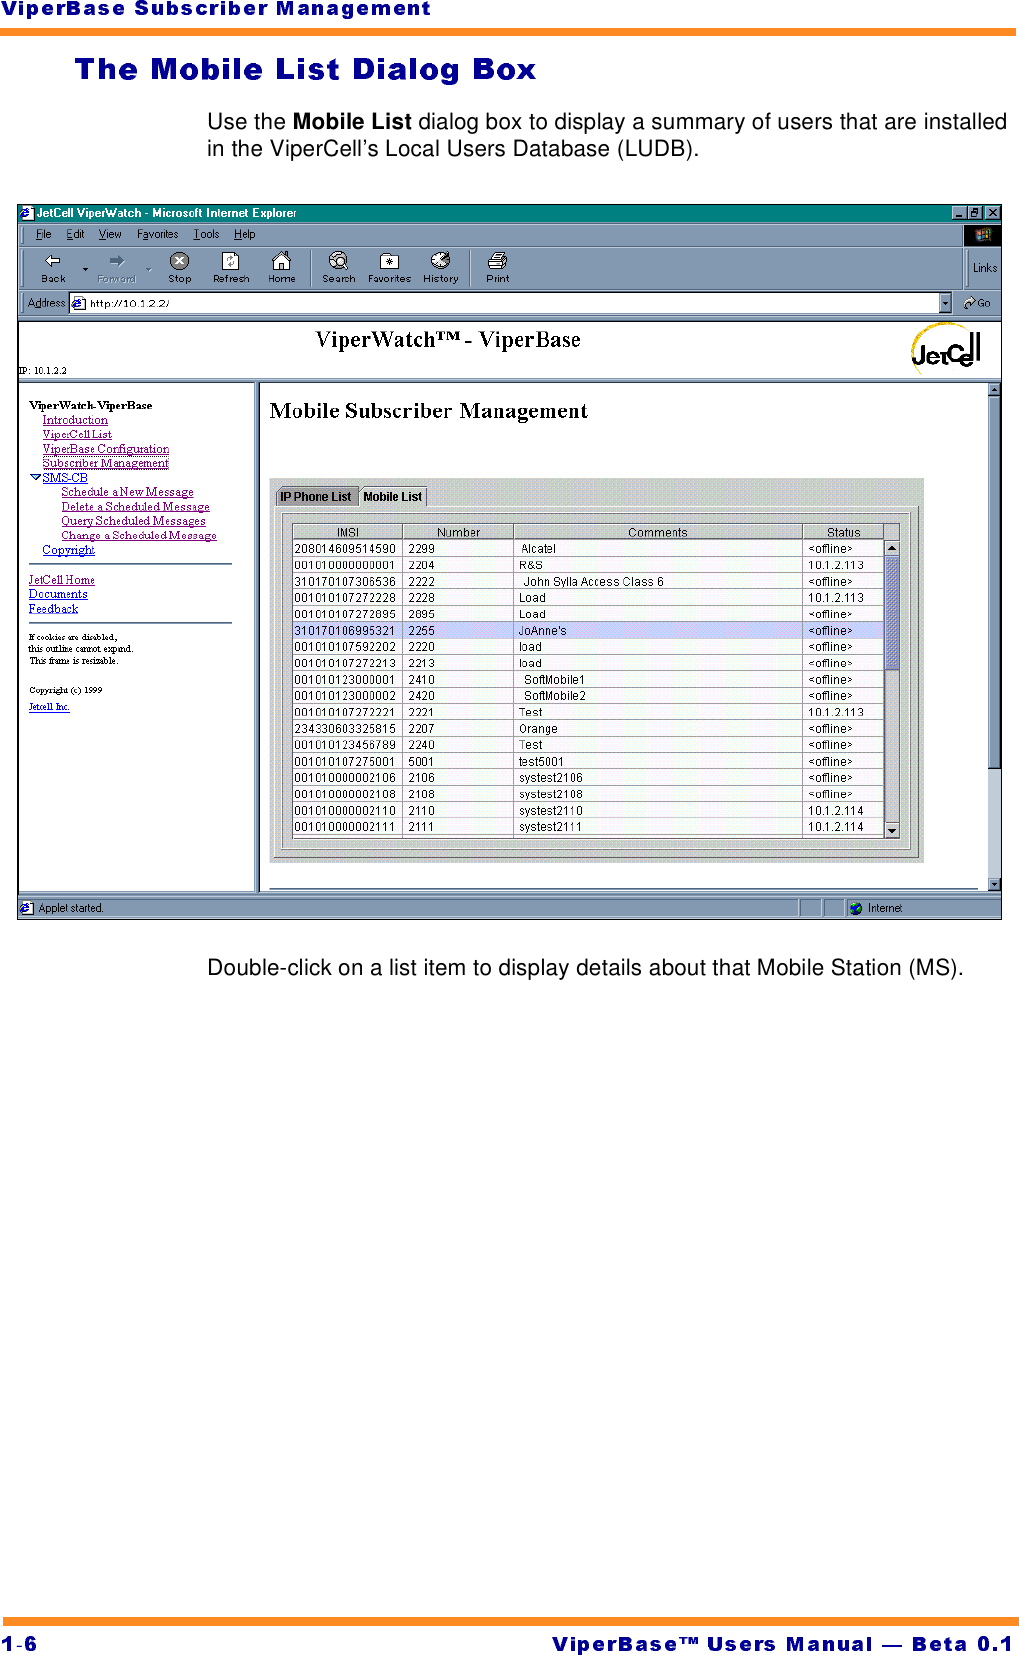 -Use the Mobile List dialog box to display a summary of users that are installed in the ViperCell’s Local Users Database (LUDB).Double-click on a list item to display details about that Mobile Station (MS).